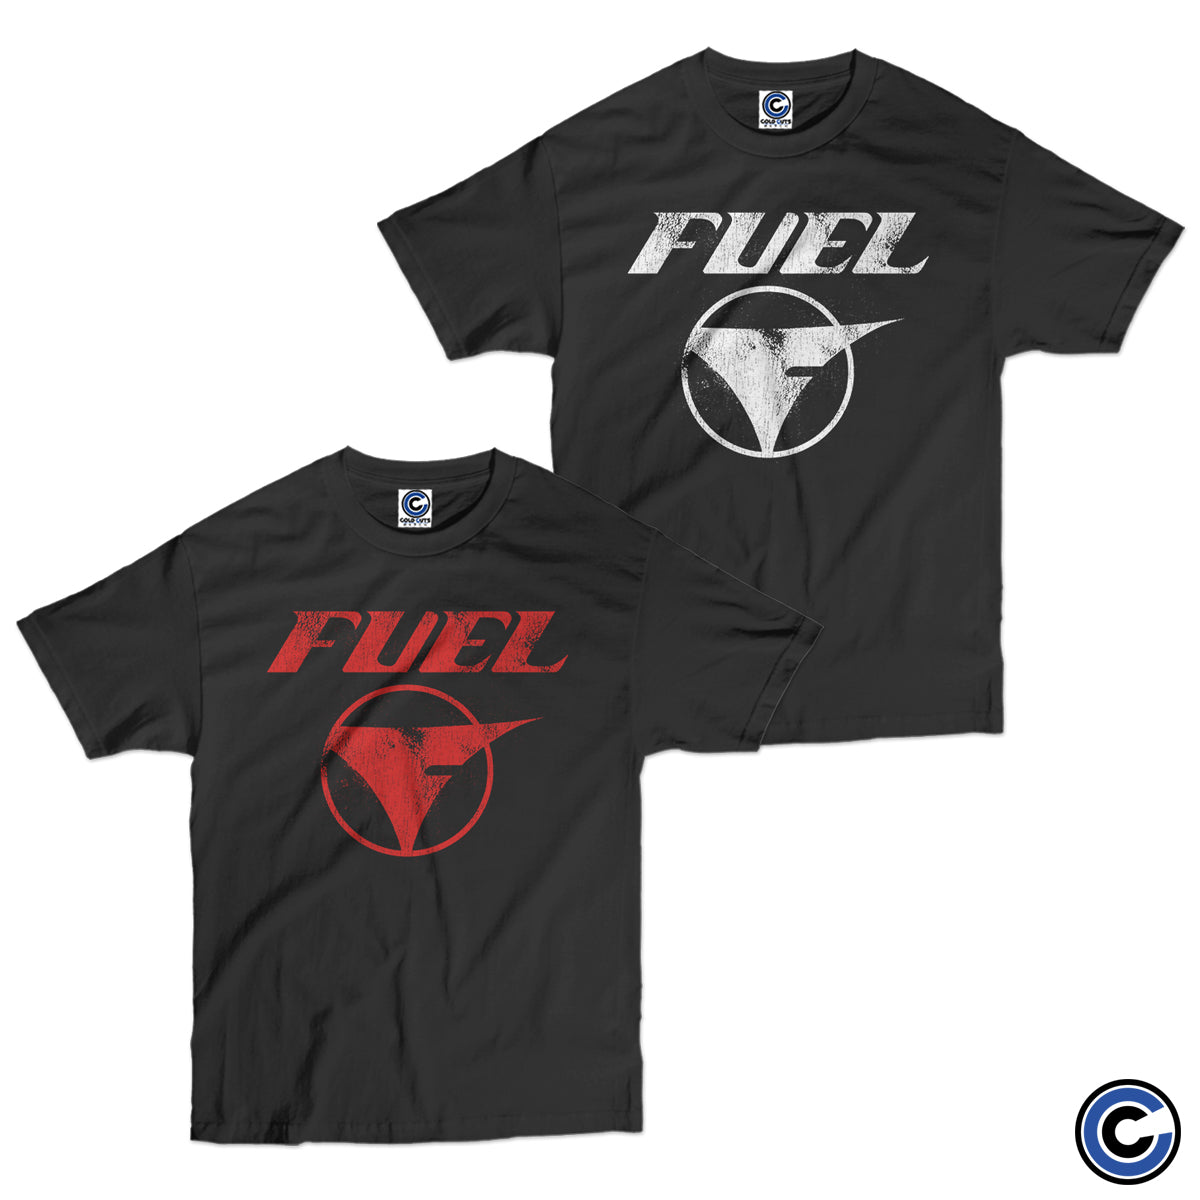 Fuel "Vintage" Youth Shirt